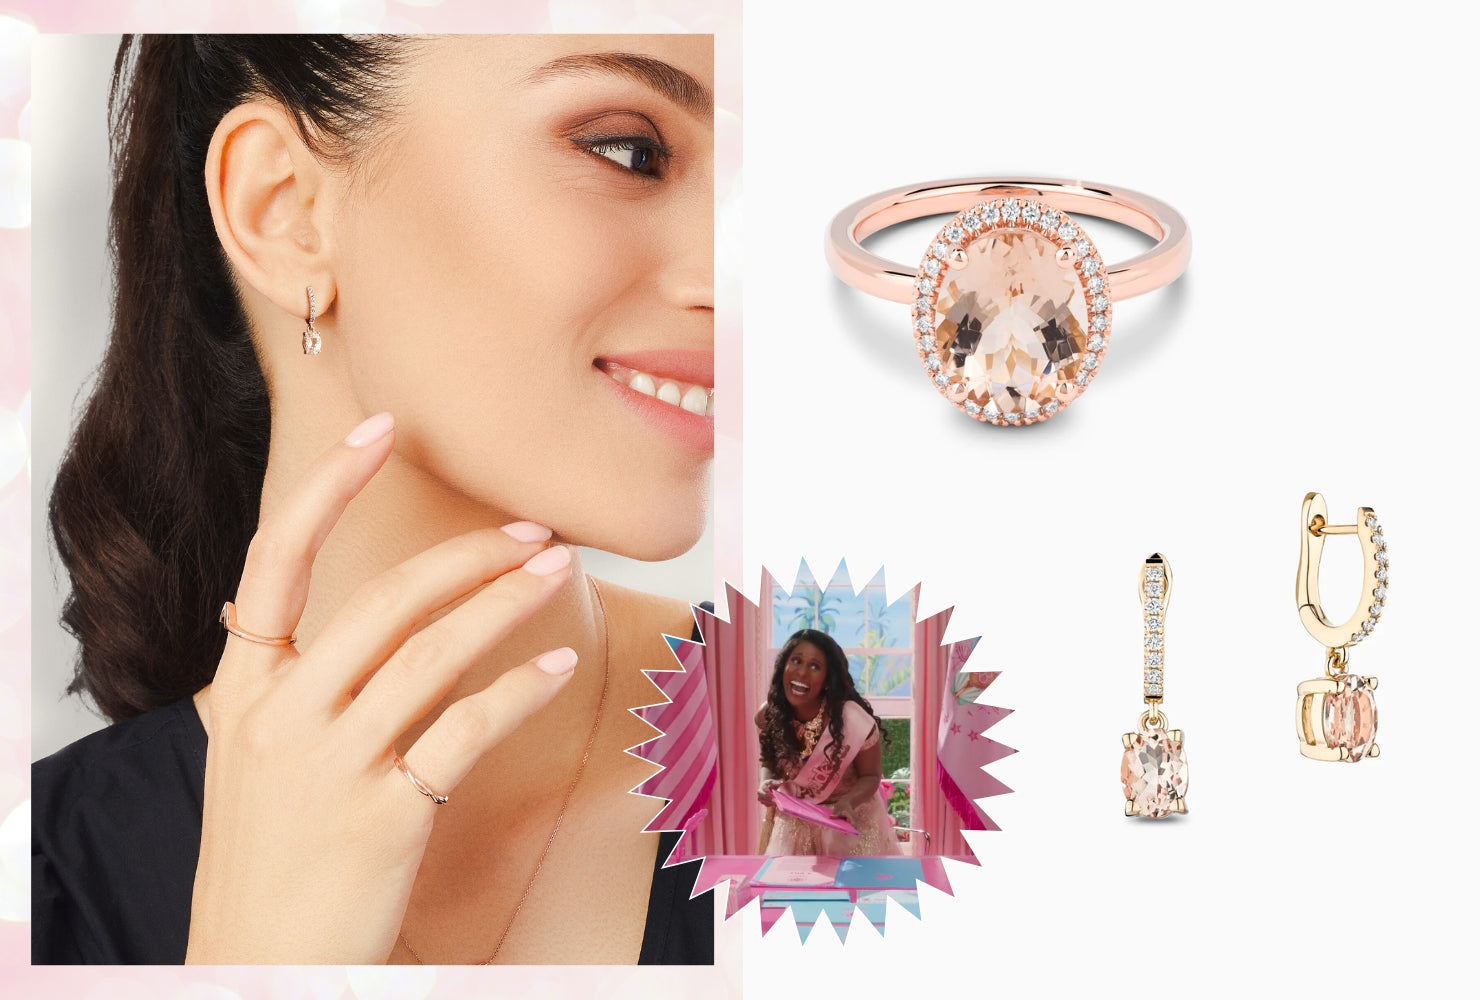 Model wearing morganite jewelry next to an image of Issa Rae's Barbie